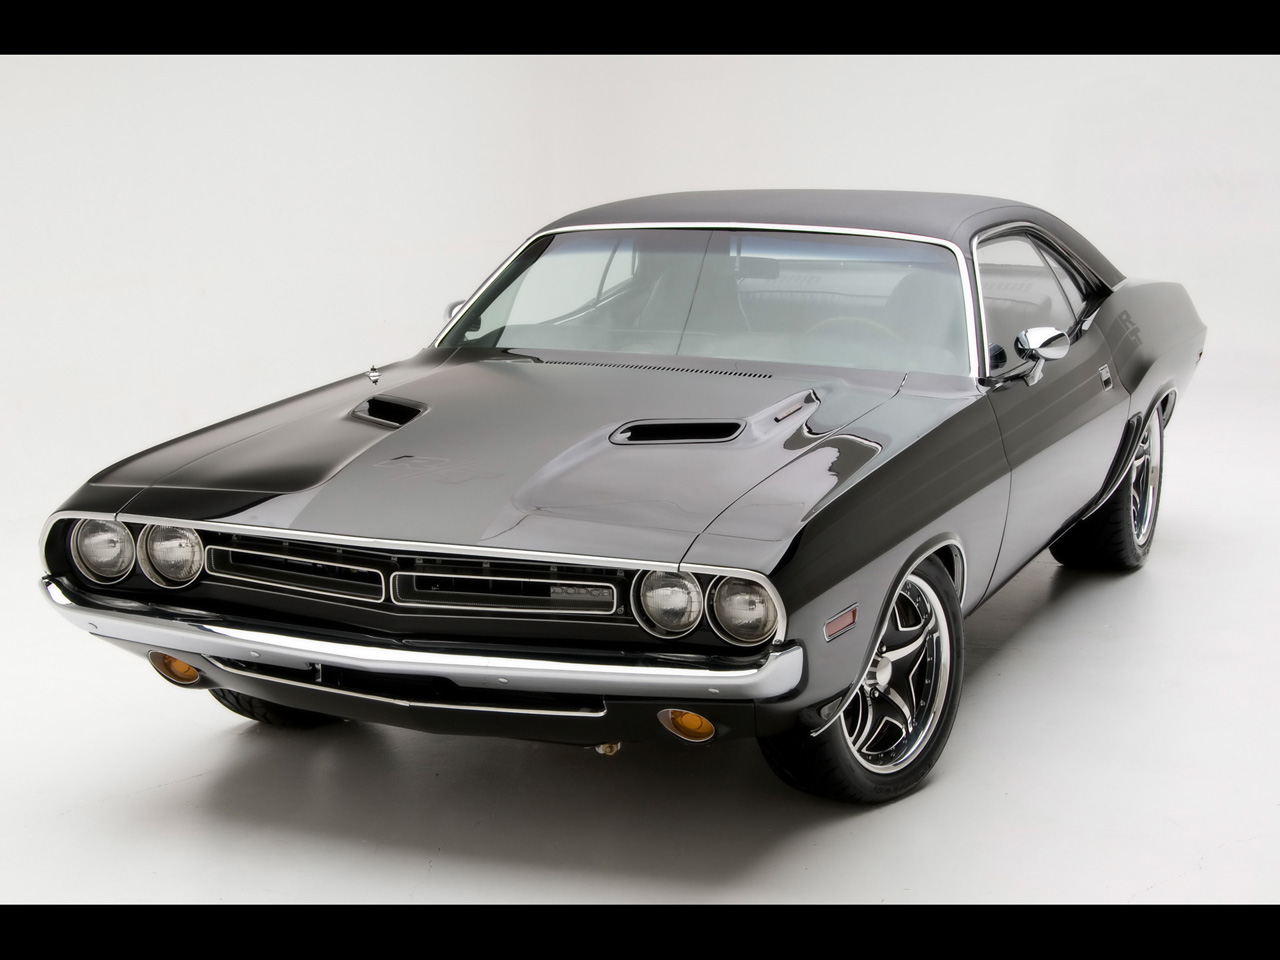 Hd-Car wallpapers: cool muscle car wallpapers